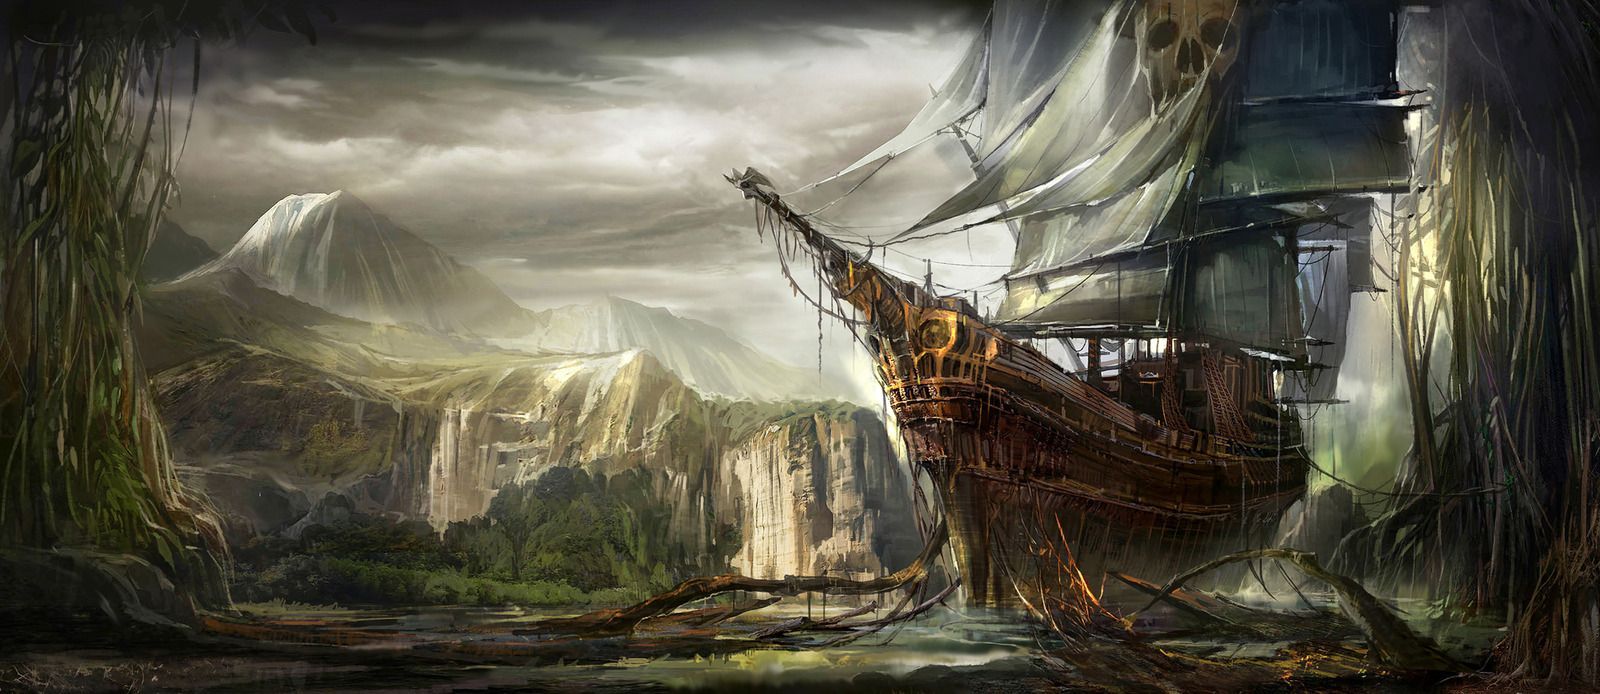 Reference 805 1920x1080 Pirates, Pirate Tavern, Boats, Rendering ...